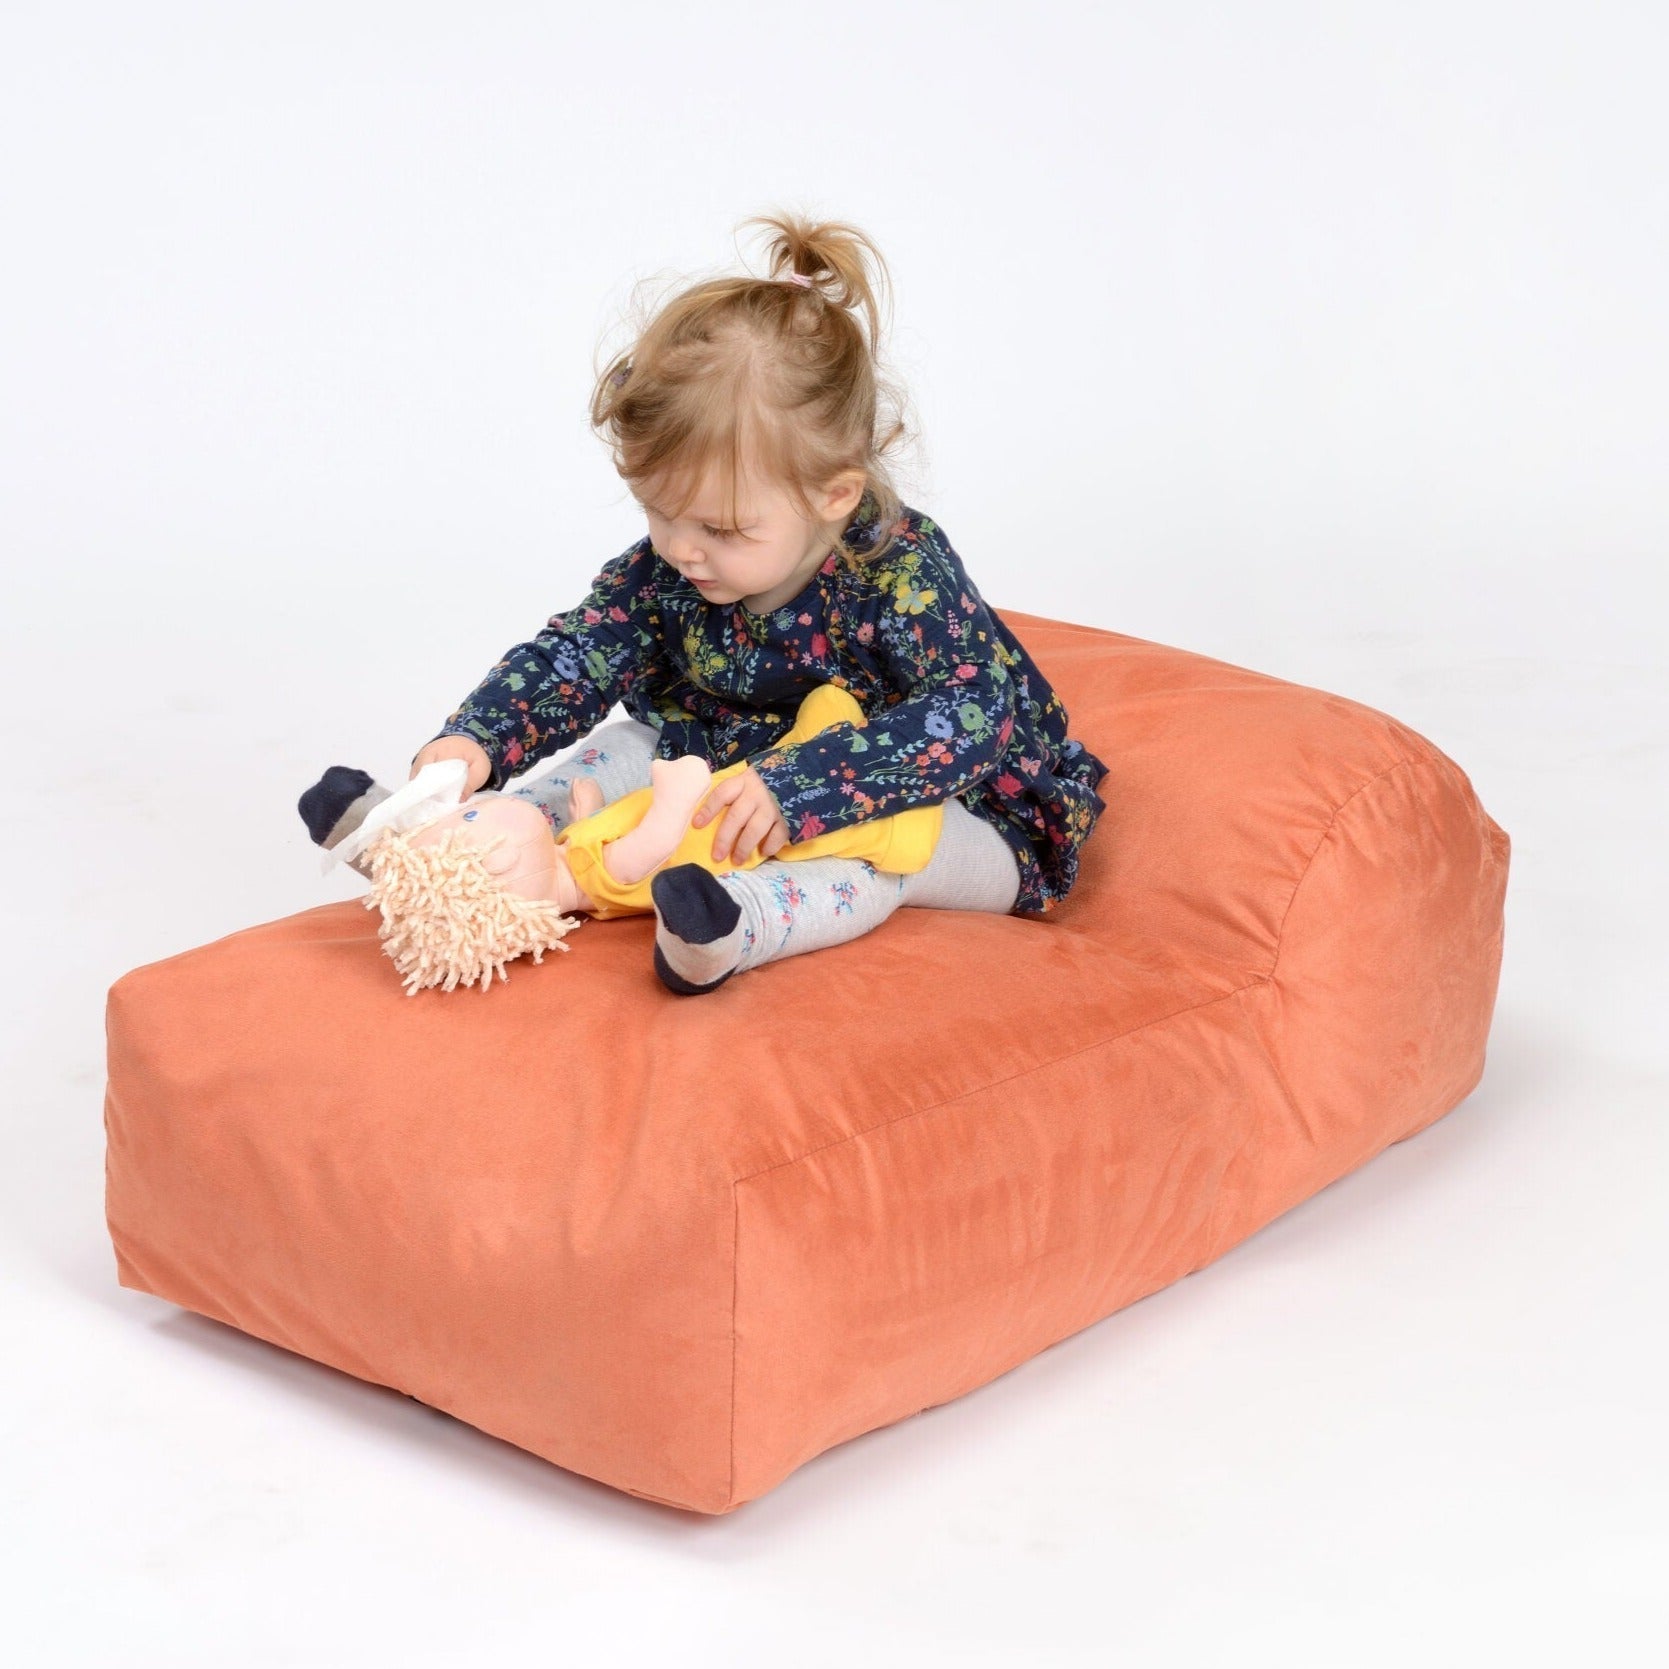 Flop Pod Beanbag, The Flop Pod Beanbag is ideal for quiet time or reading corners this Flop-pod beanbag has a fibre pillow section that provides vital neck support alongside a bead filled body section to provide top quality comfort. The outer cover on the Flop Pod Beanbag is manufactured from faux Suede and can be removed easily and washed in the washing machine at 30°C. Flop-pod beanbag Fibre pillow section Provides important neck support Bead filled body to provide maximum comfort Ideal for quiet time Per